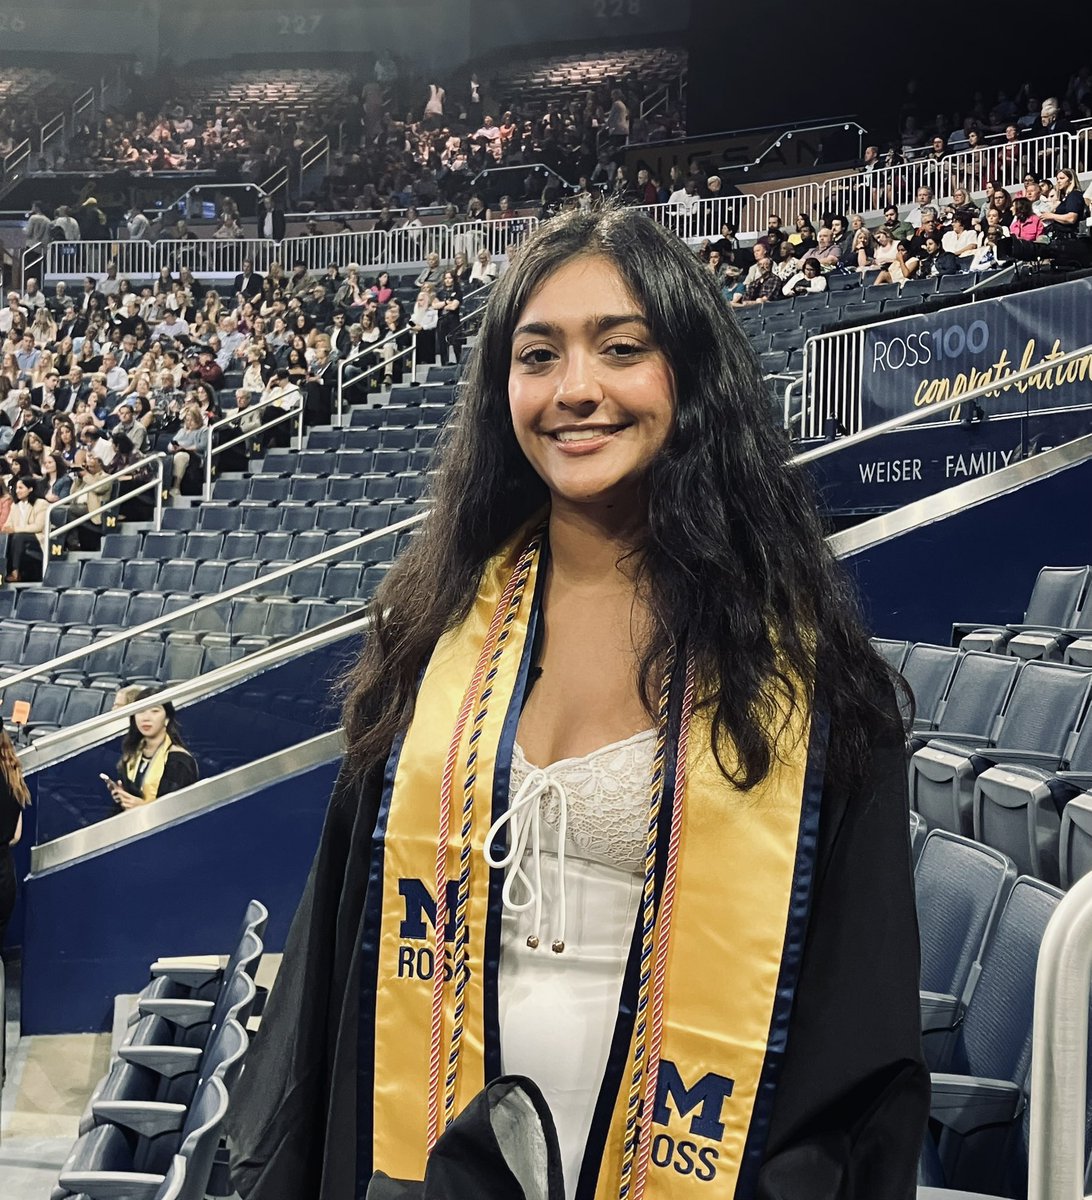 Congratulations to all the graduates @UMich. Our daughter graduated from @MichiganRoss Go Blue!